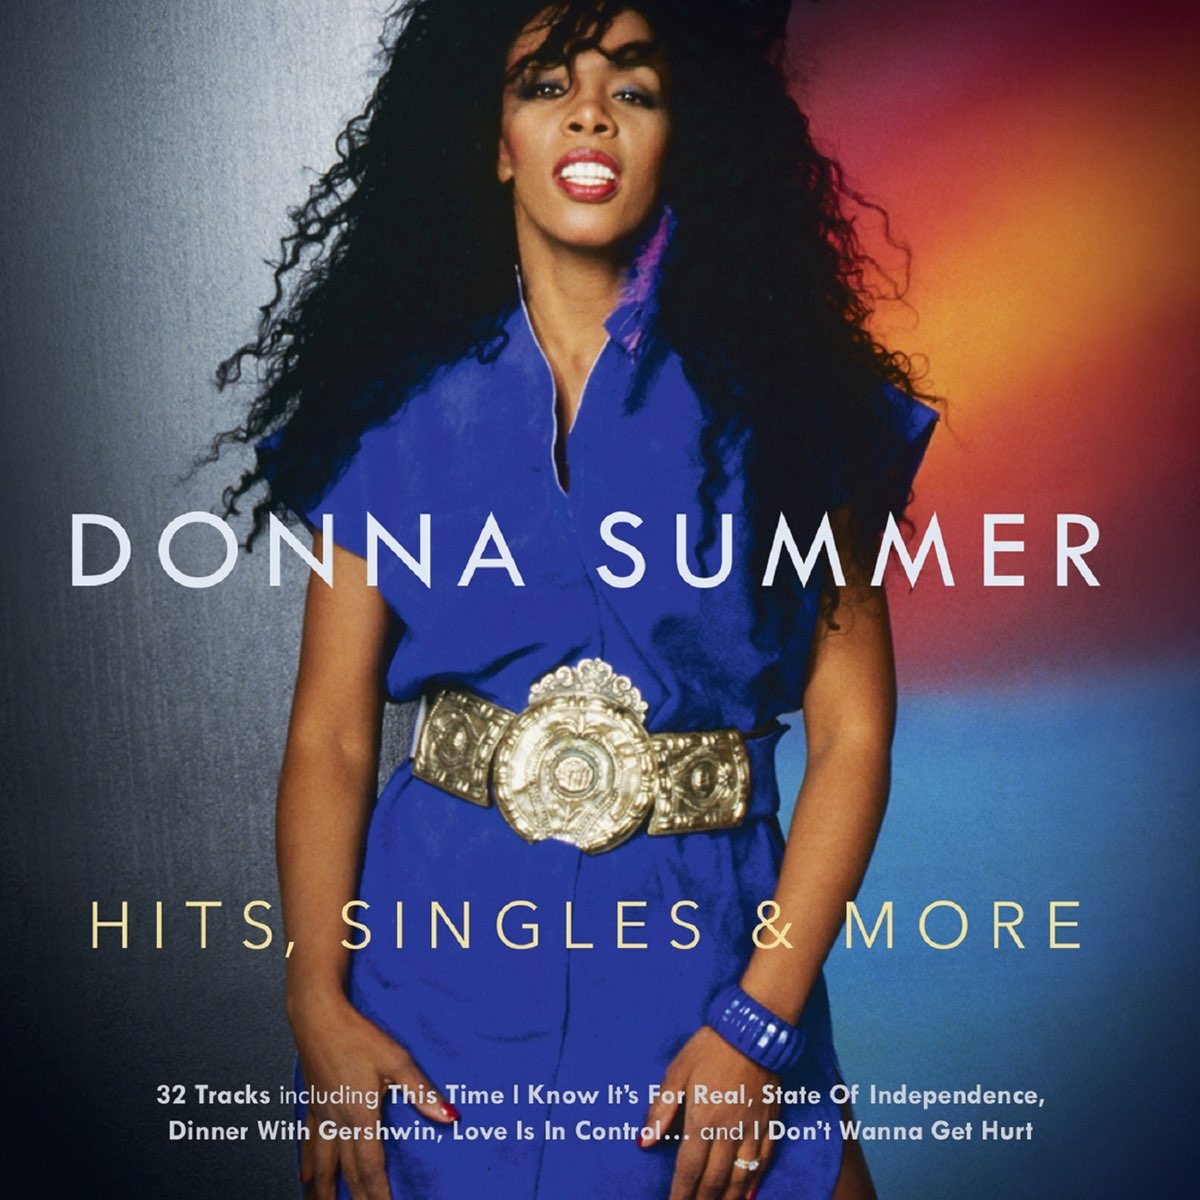 Hits, Singles & More by Donna Summer on Apple Music